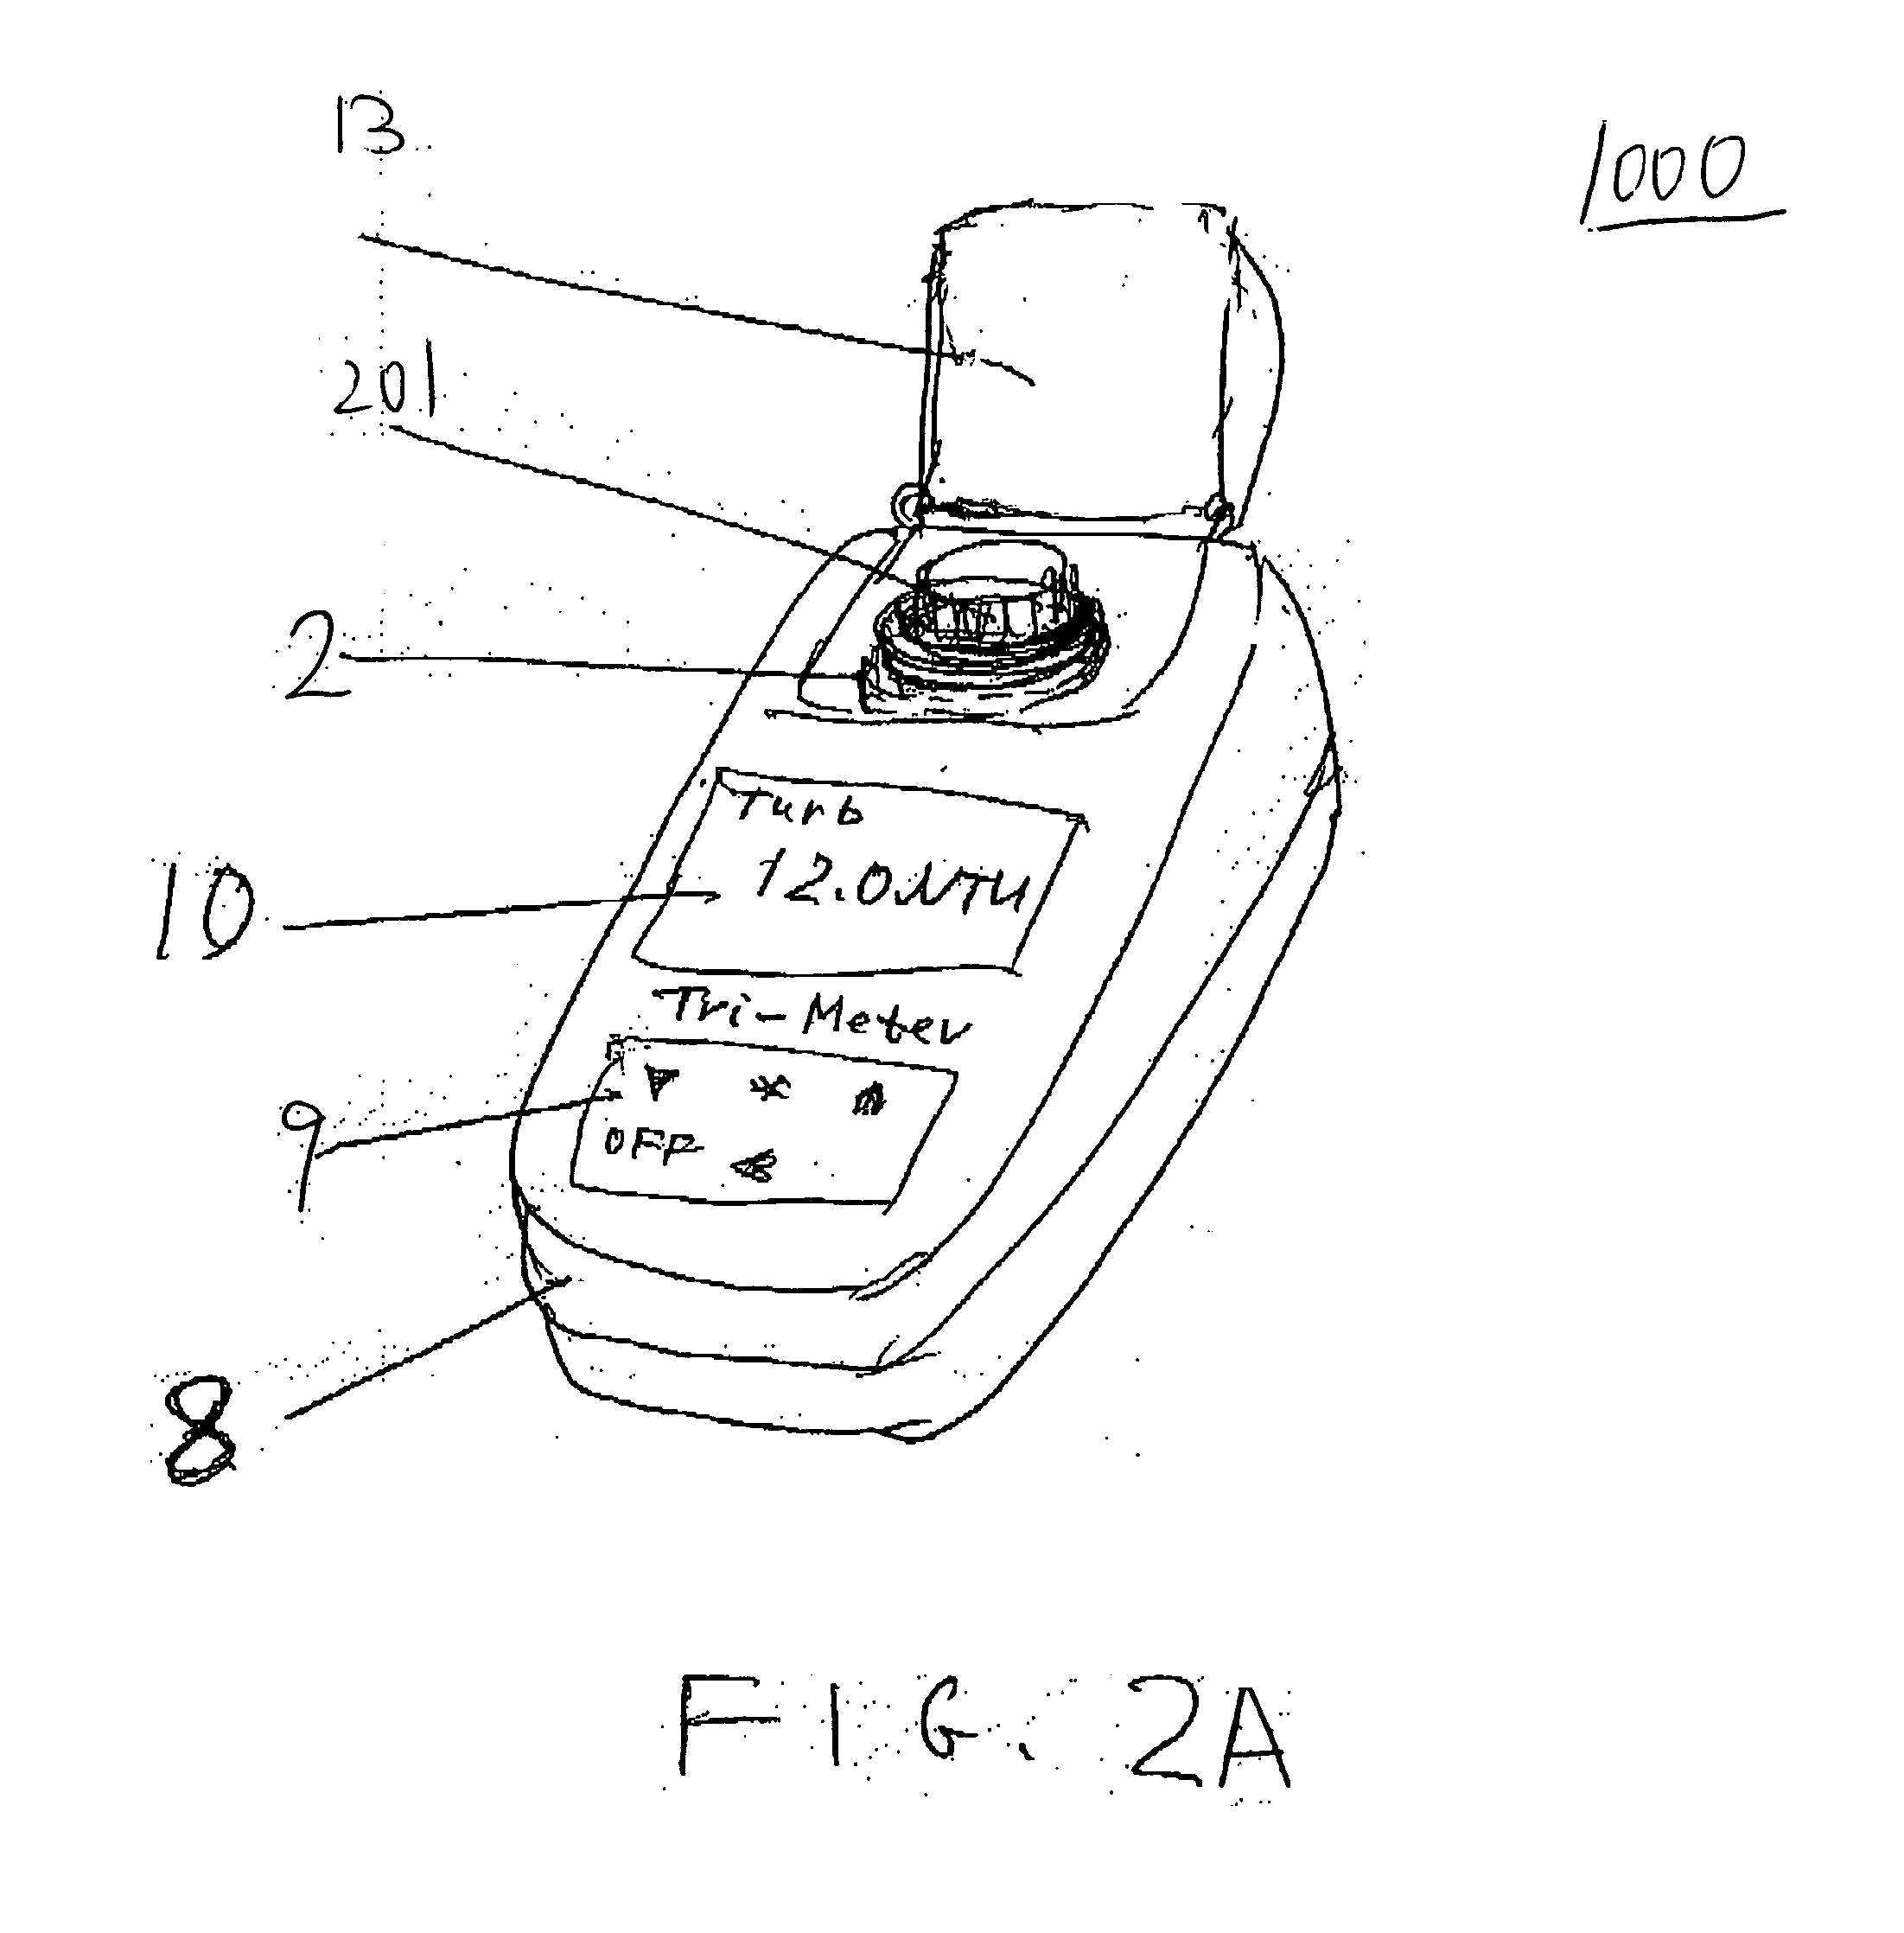 Portable multi-channel device for optically testing a liquid sample